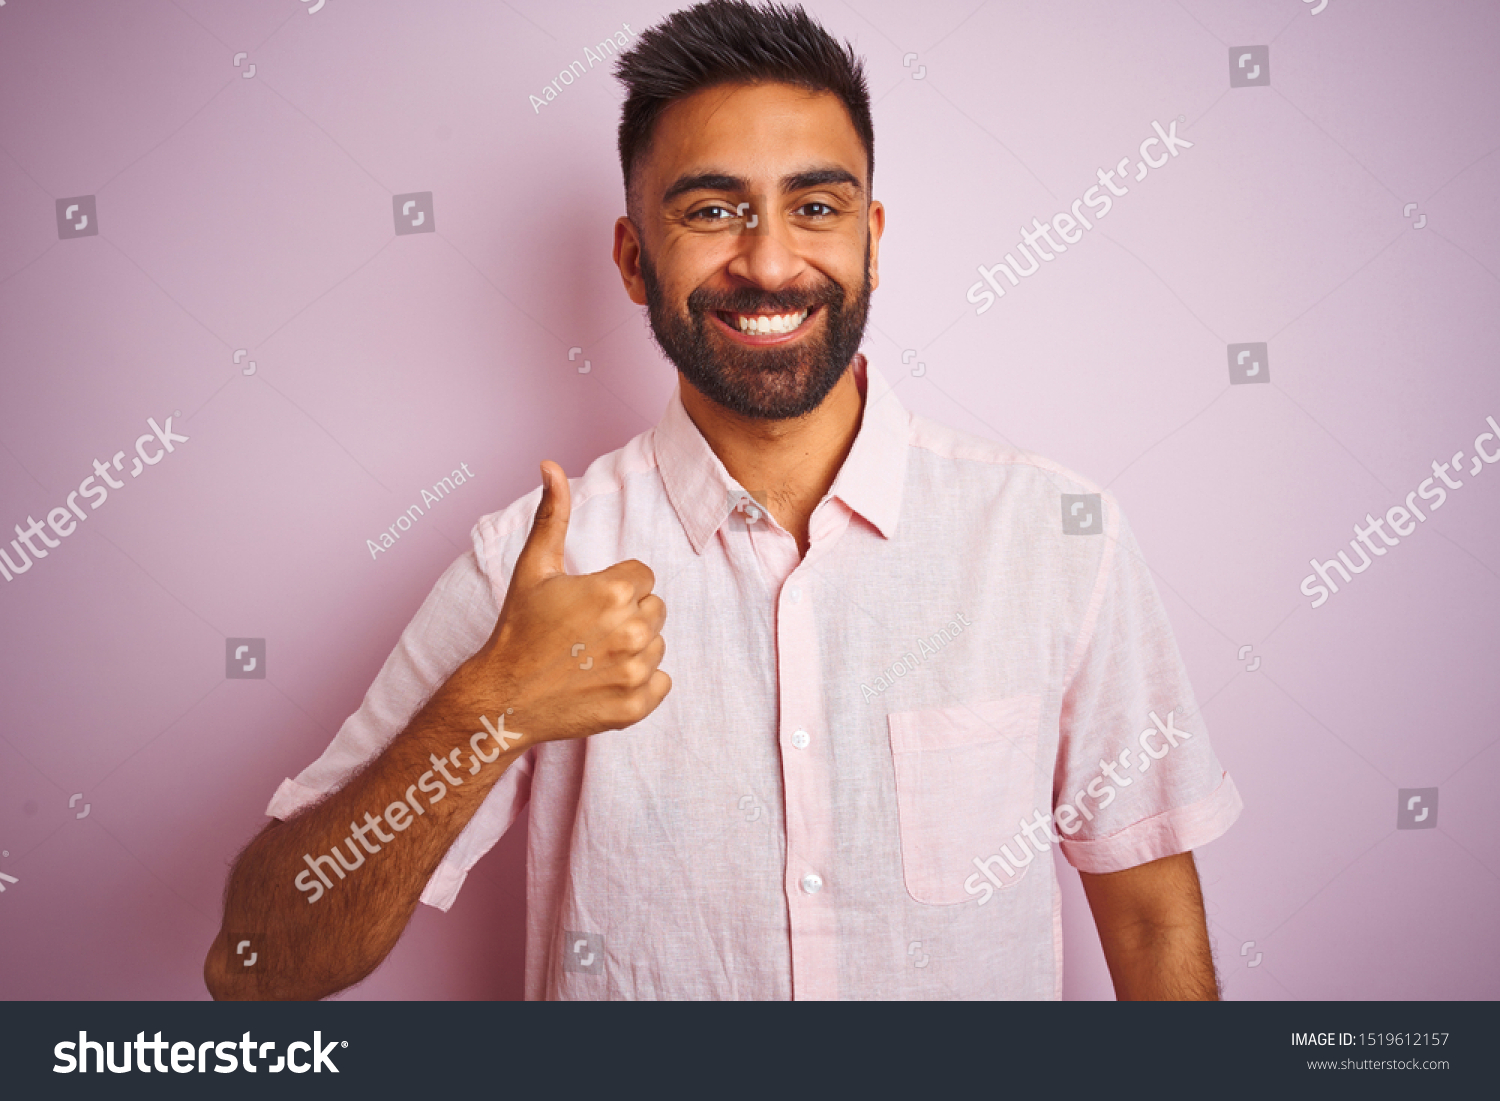 Young indian man wearing casual shirt standing over isolated pink background doing happy thumbs up gesture with hand. Approving expression looking at the camera showing success. #1519612157